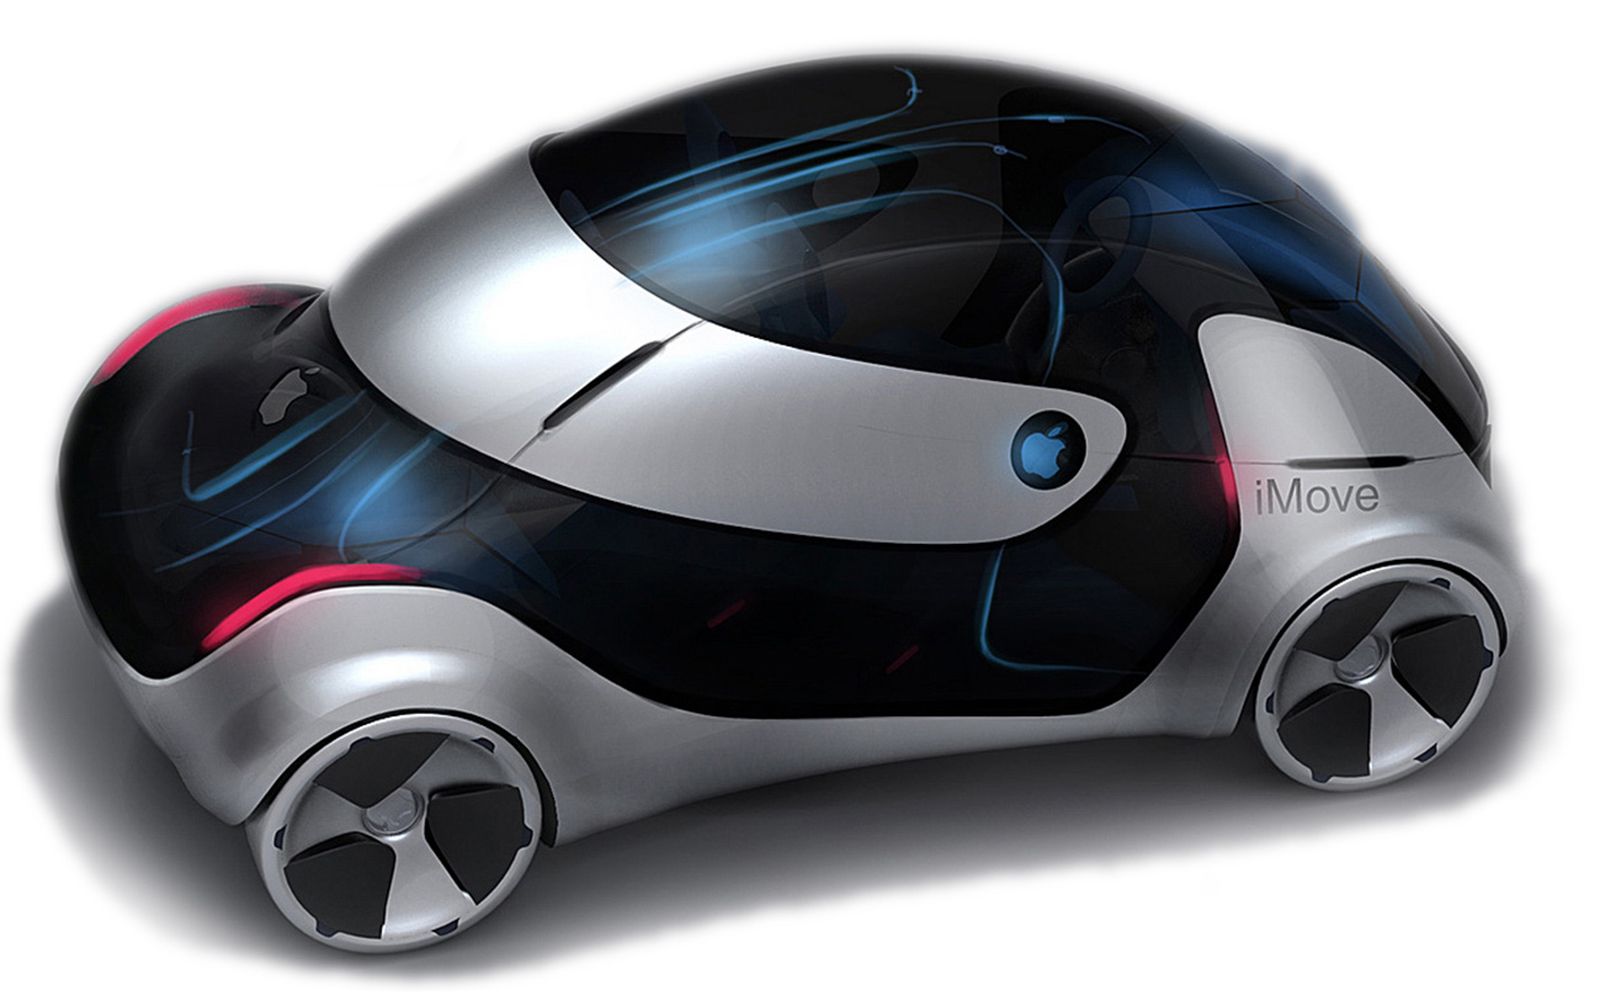 apple car looking more likely as electric car battery engineers get poached image 1